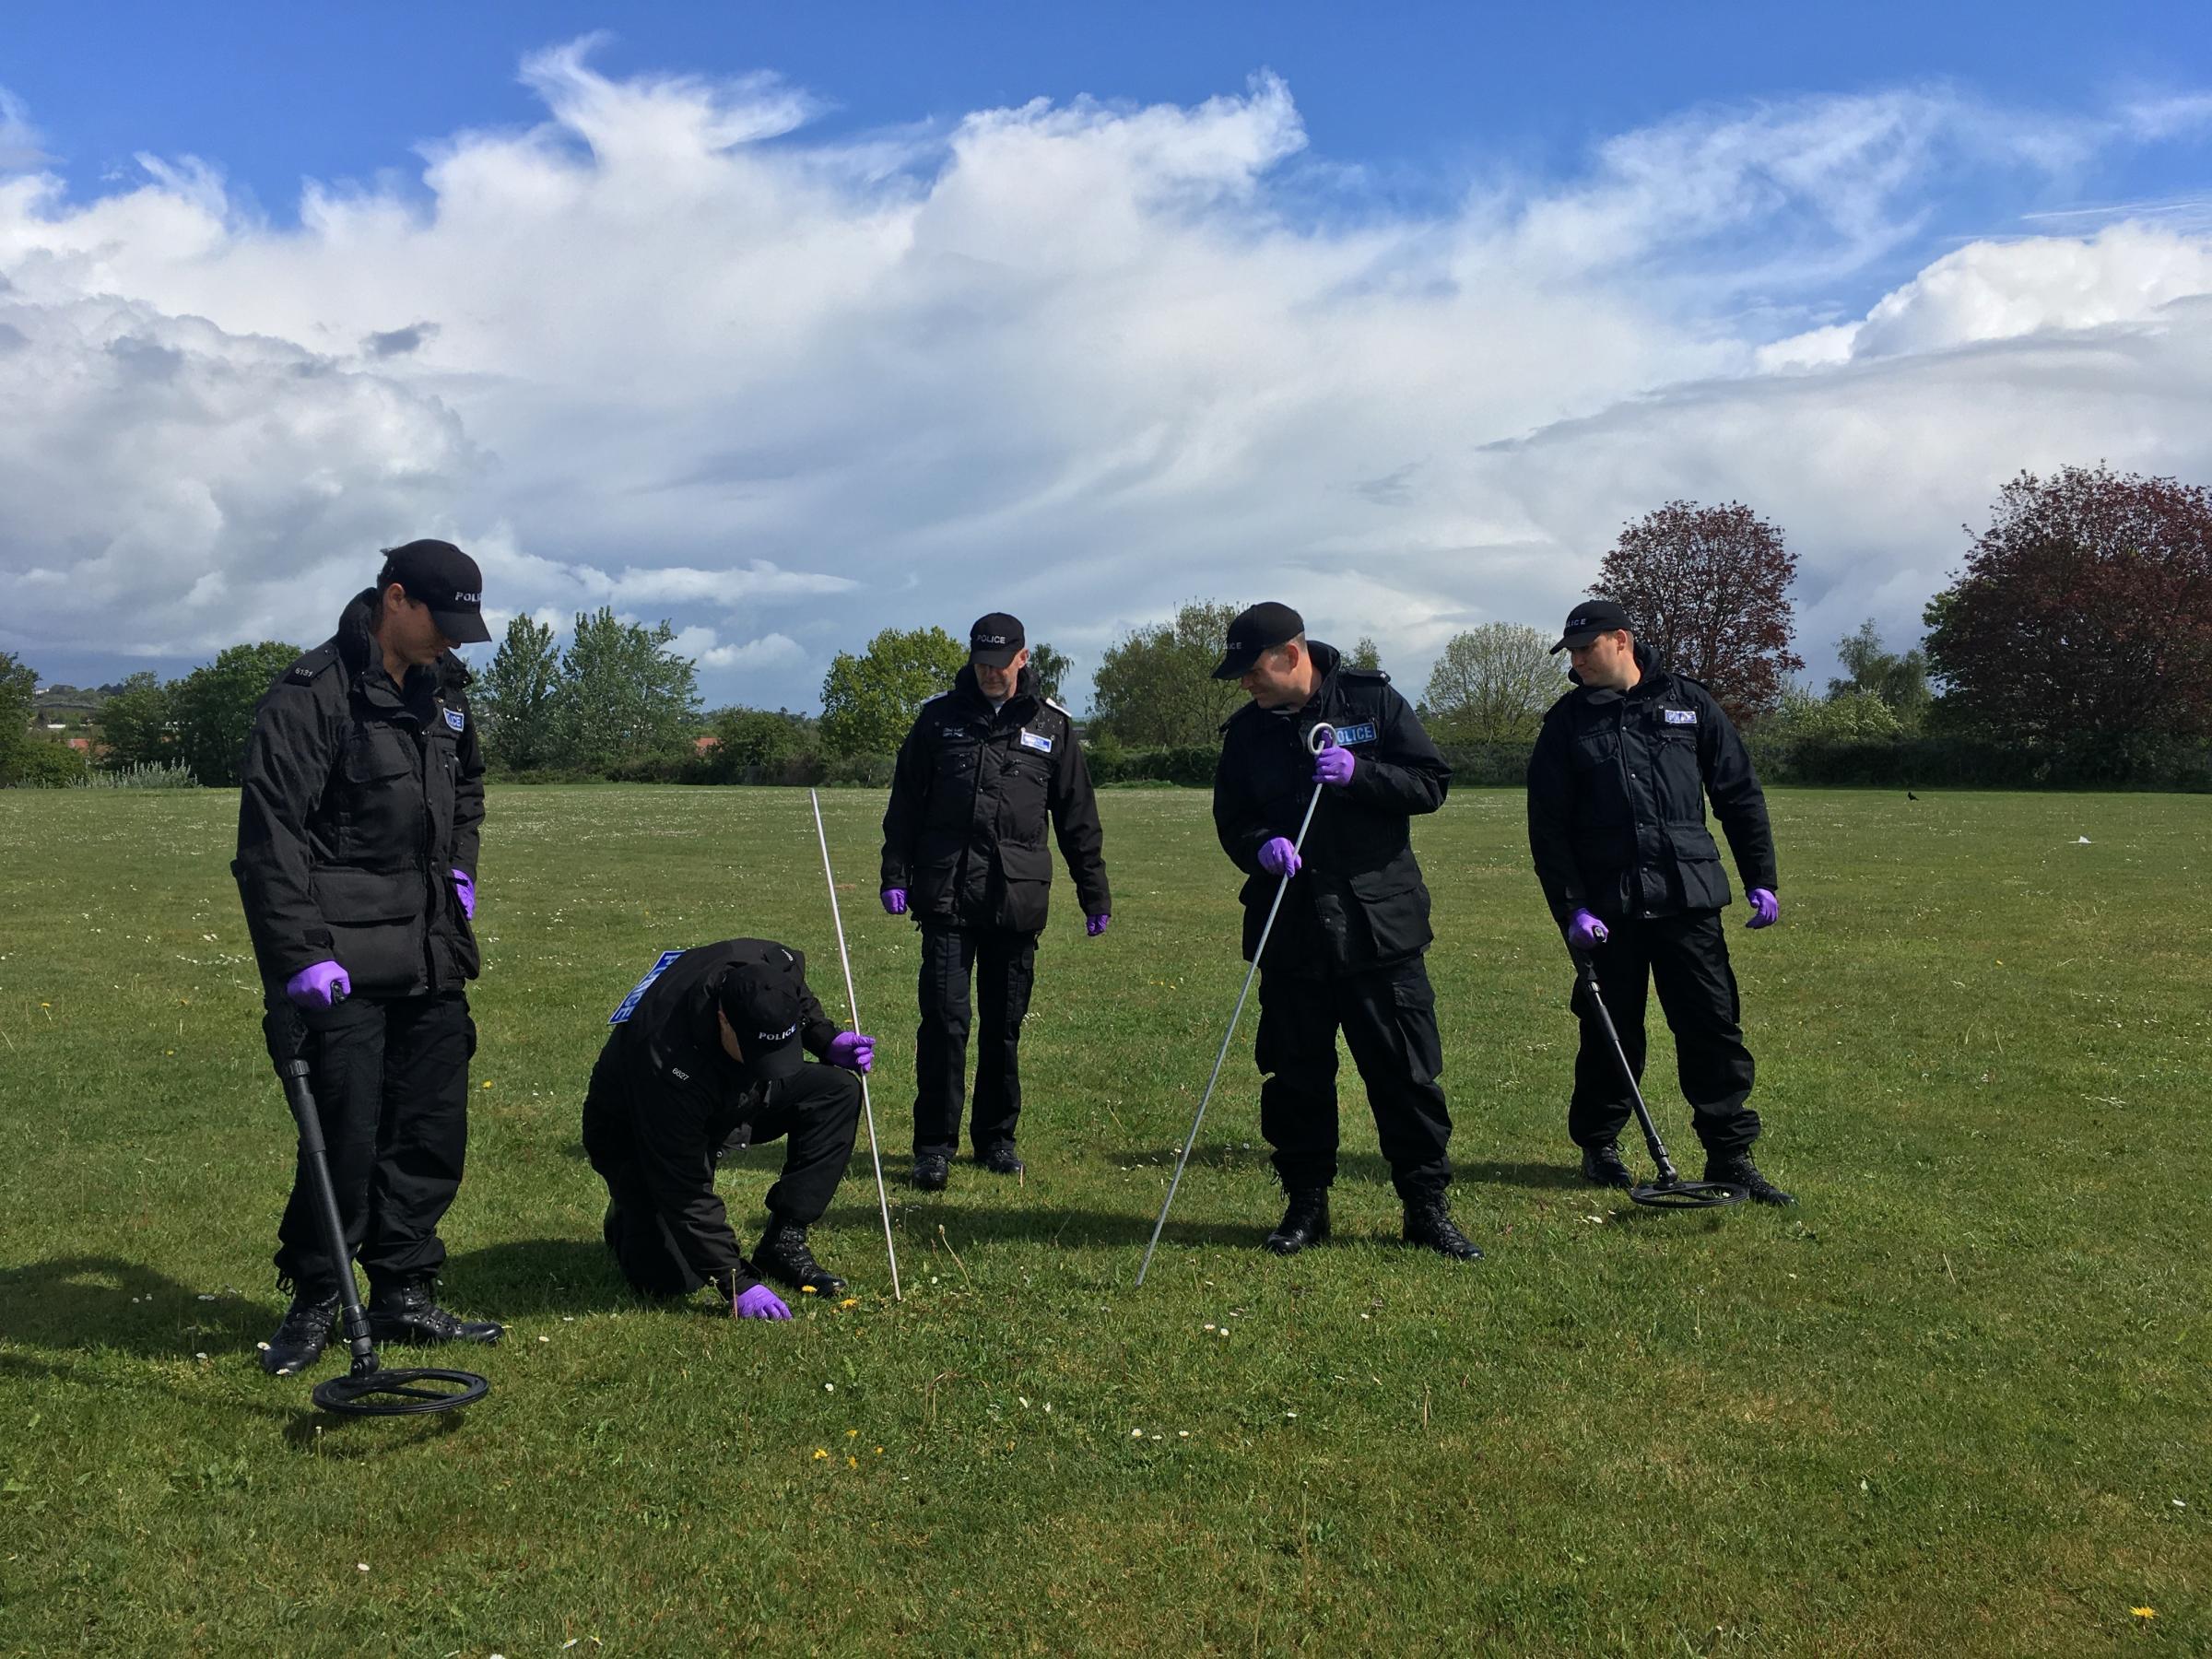 Devon and Cornwall police officers demonstrate how they would carry out a search ahead of the G7 summit (Image: LDRS/Richard Whitehouse)